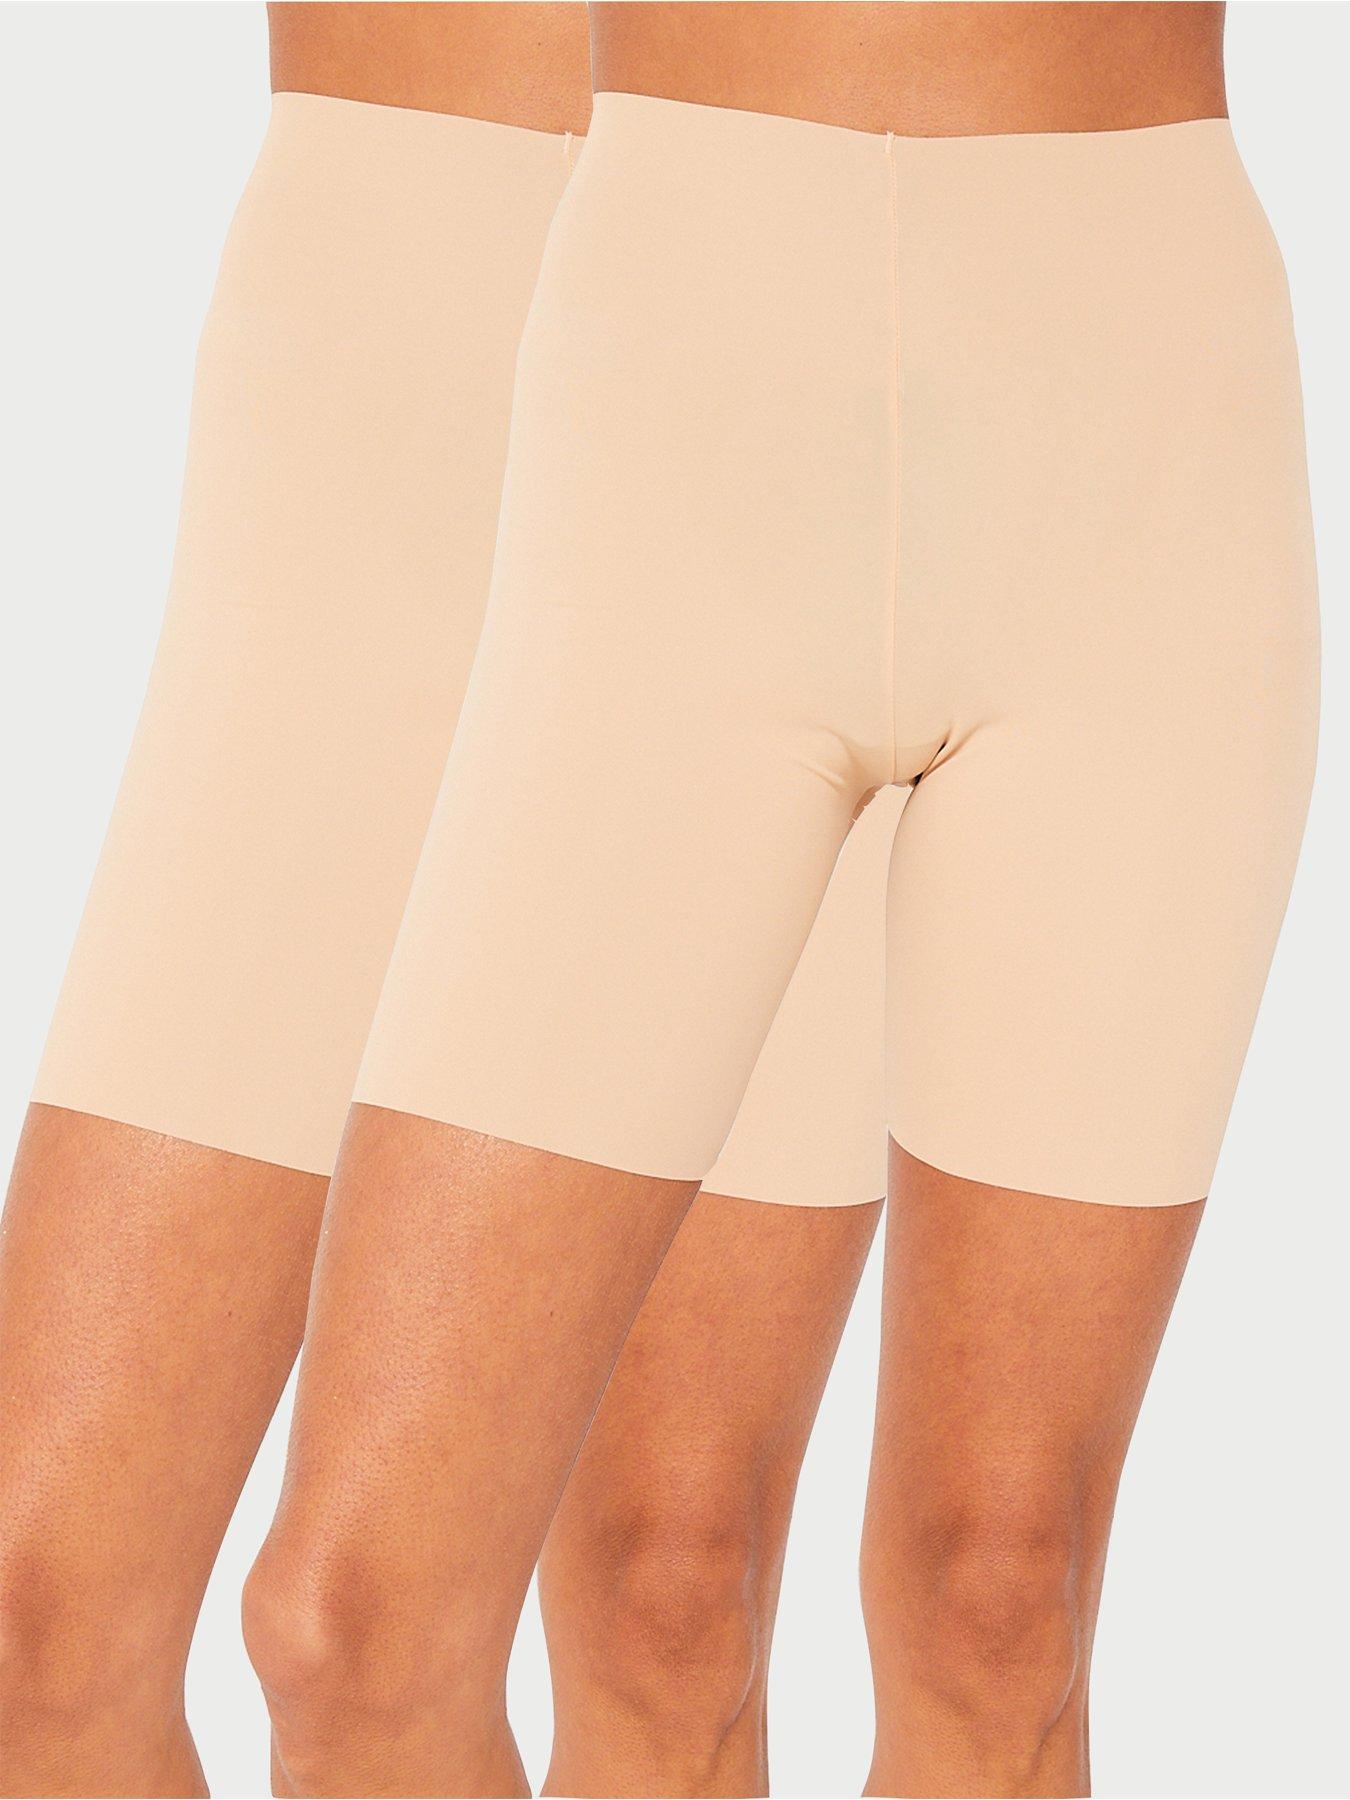 Anti Chafing Shorts. Nude